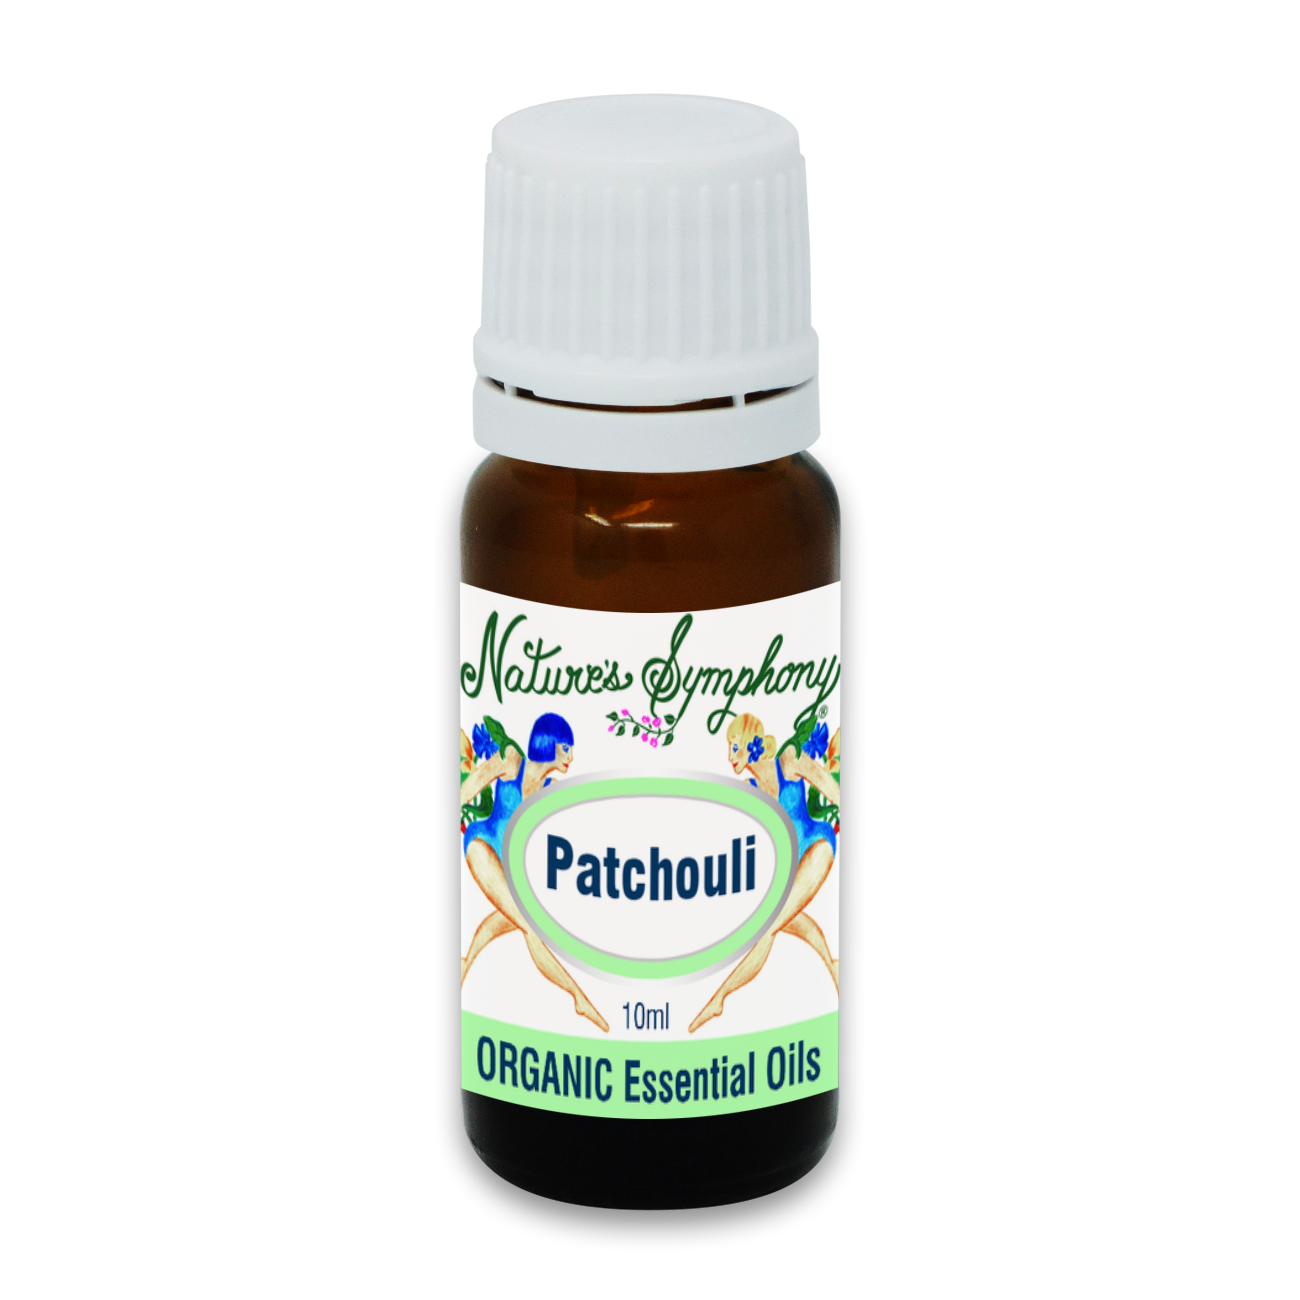 Patchouli, Organic/Wildcrafted oil - 10ml